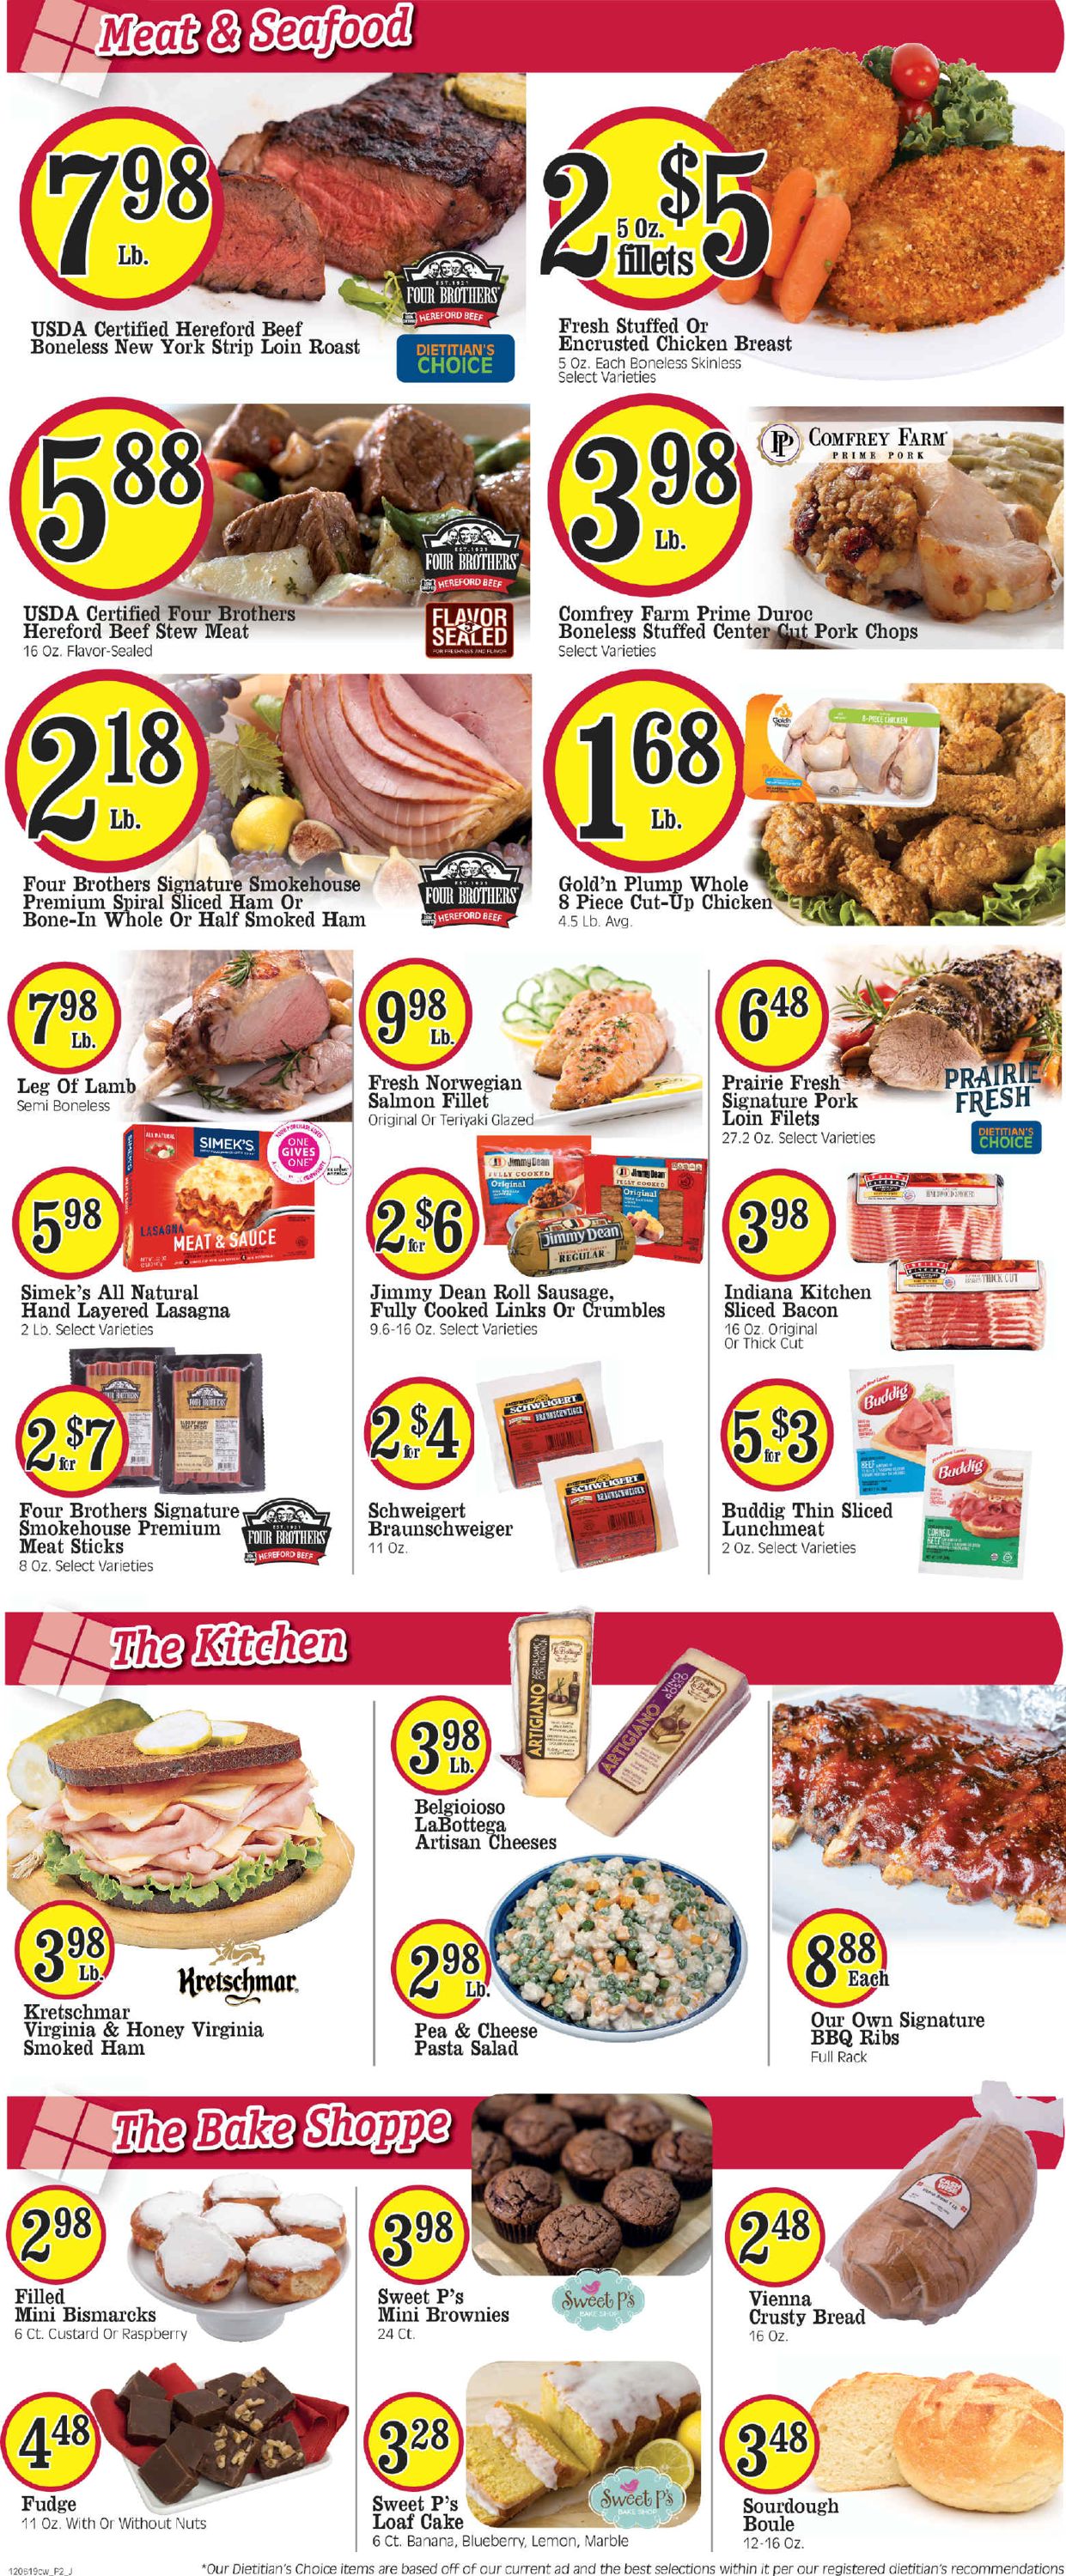 Cash Wise - Holidays Ad 2019 Weekly Ad Circular - valid 12/08-12/14/2019 (Page 2)